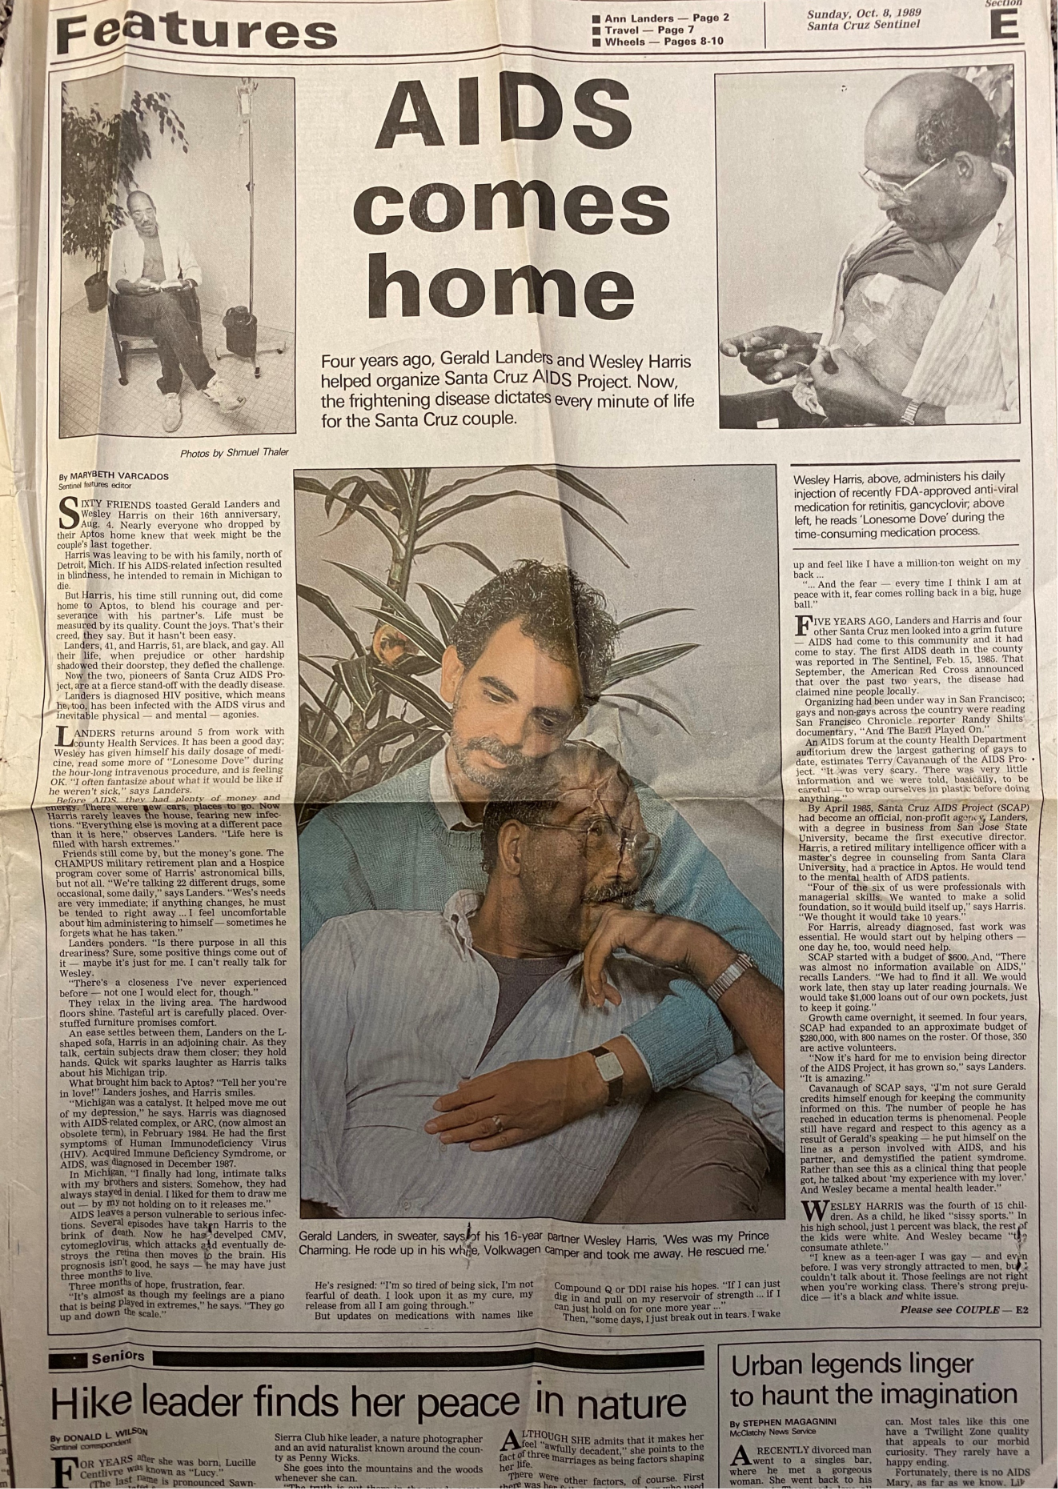 AIDS Comes Home newspaper article.